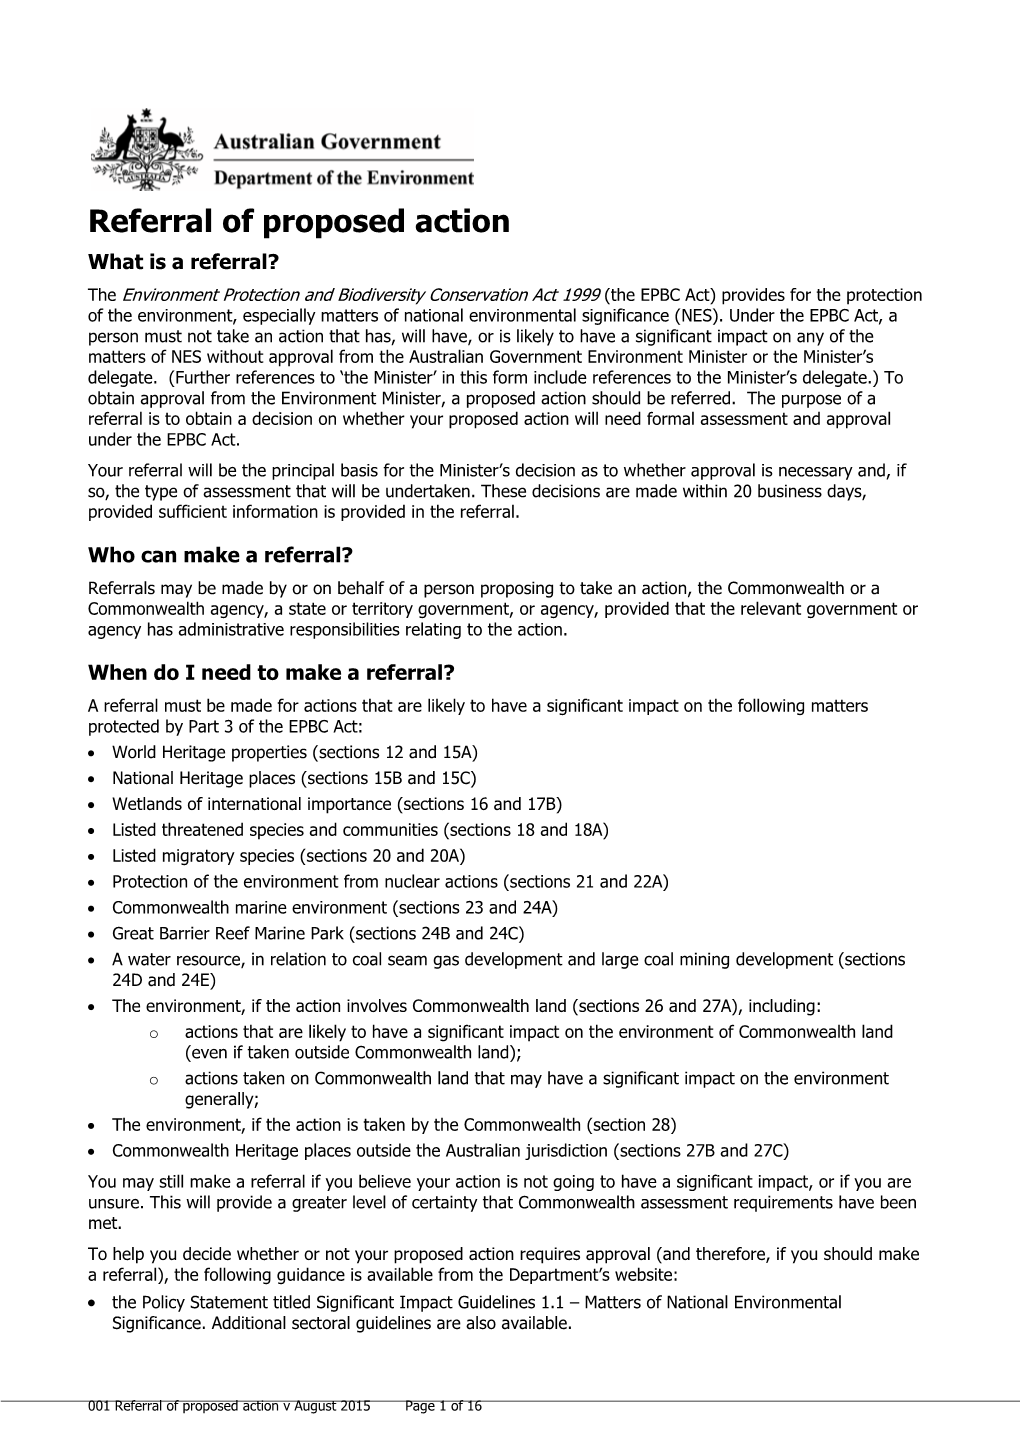 Referral of Proposed Action Form